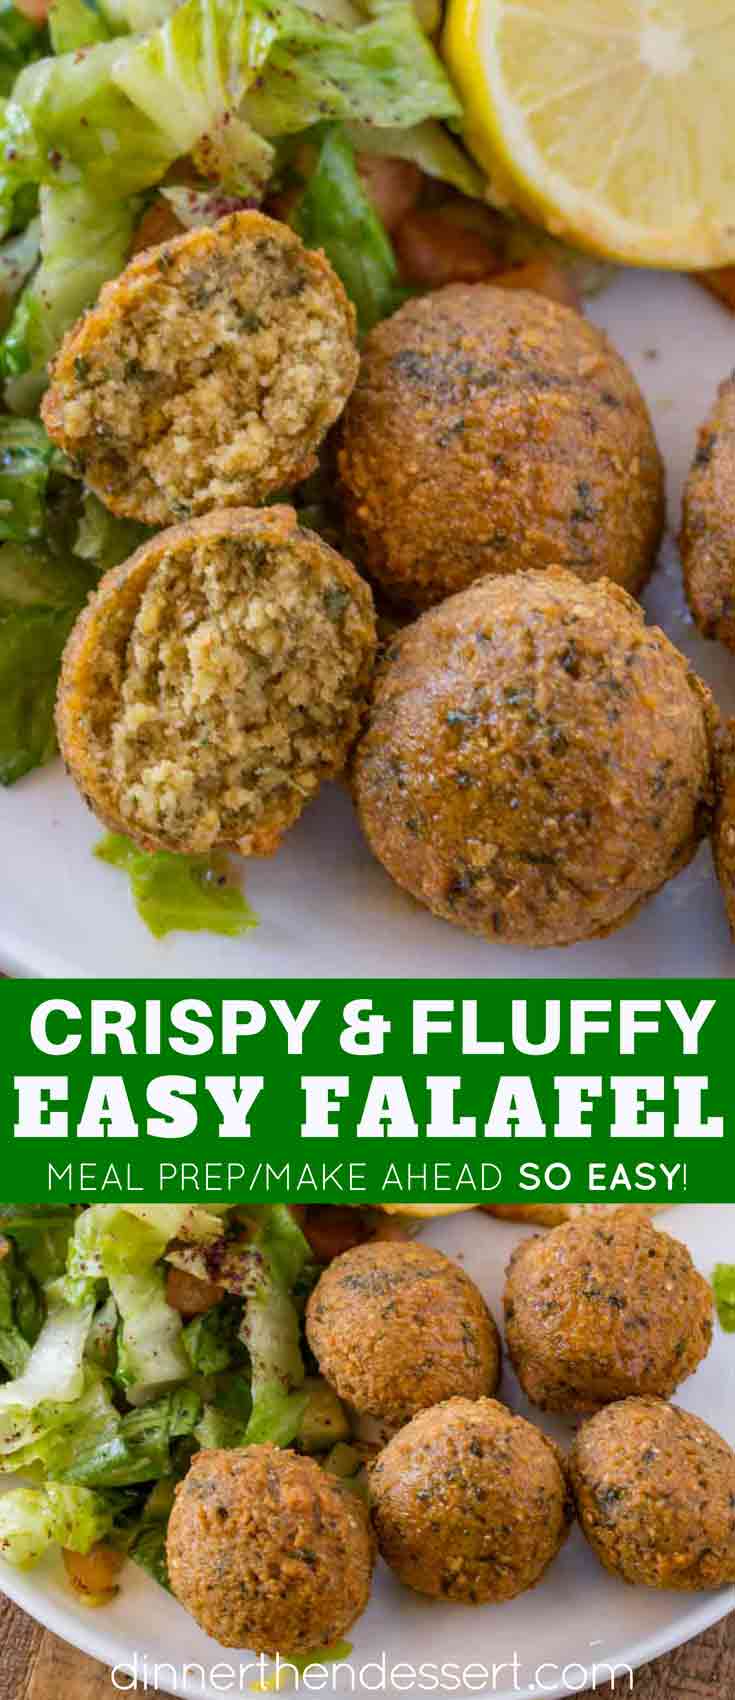 Easy And Authentic Falafel Recipe - Dinner, then Dessert